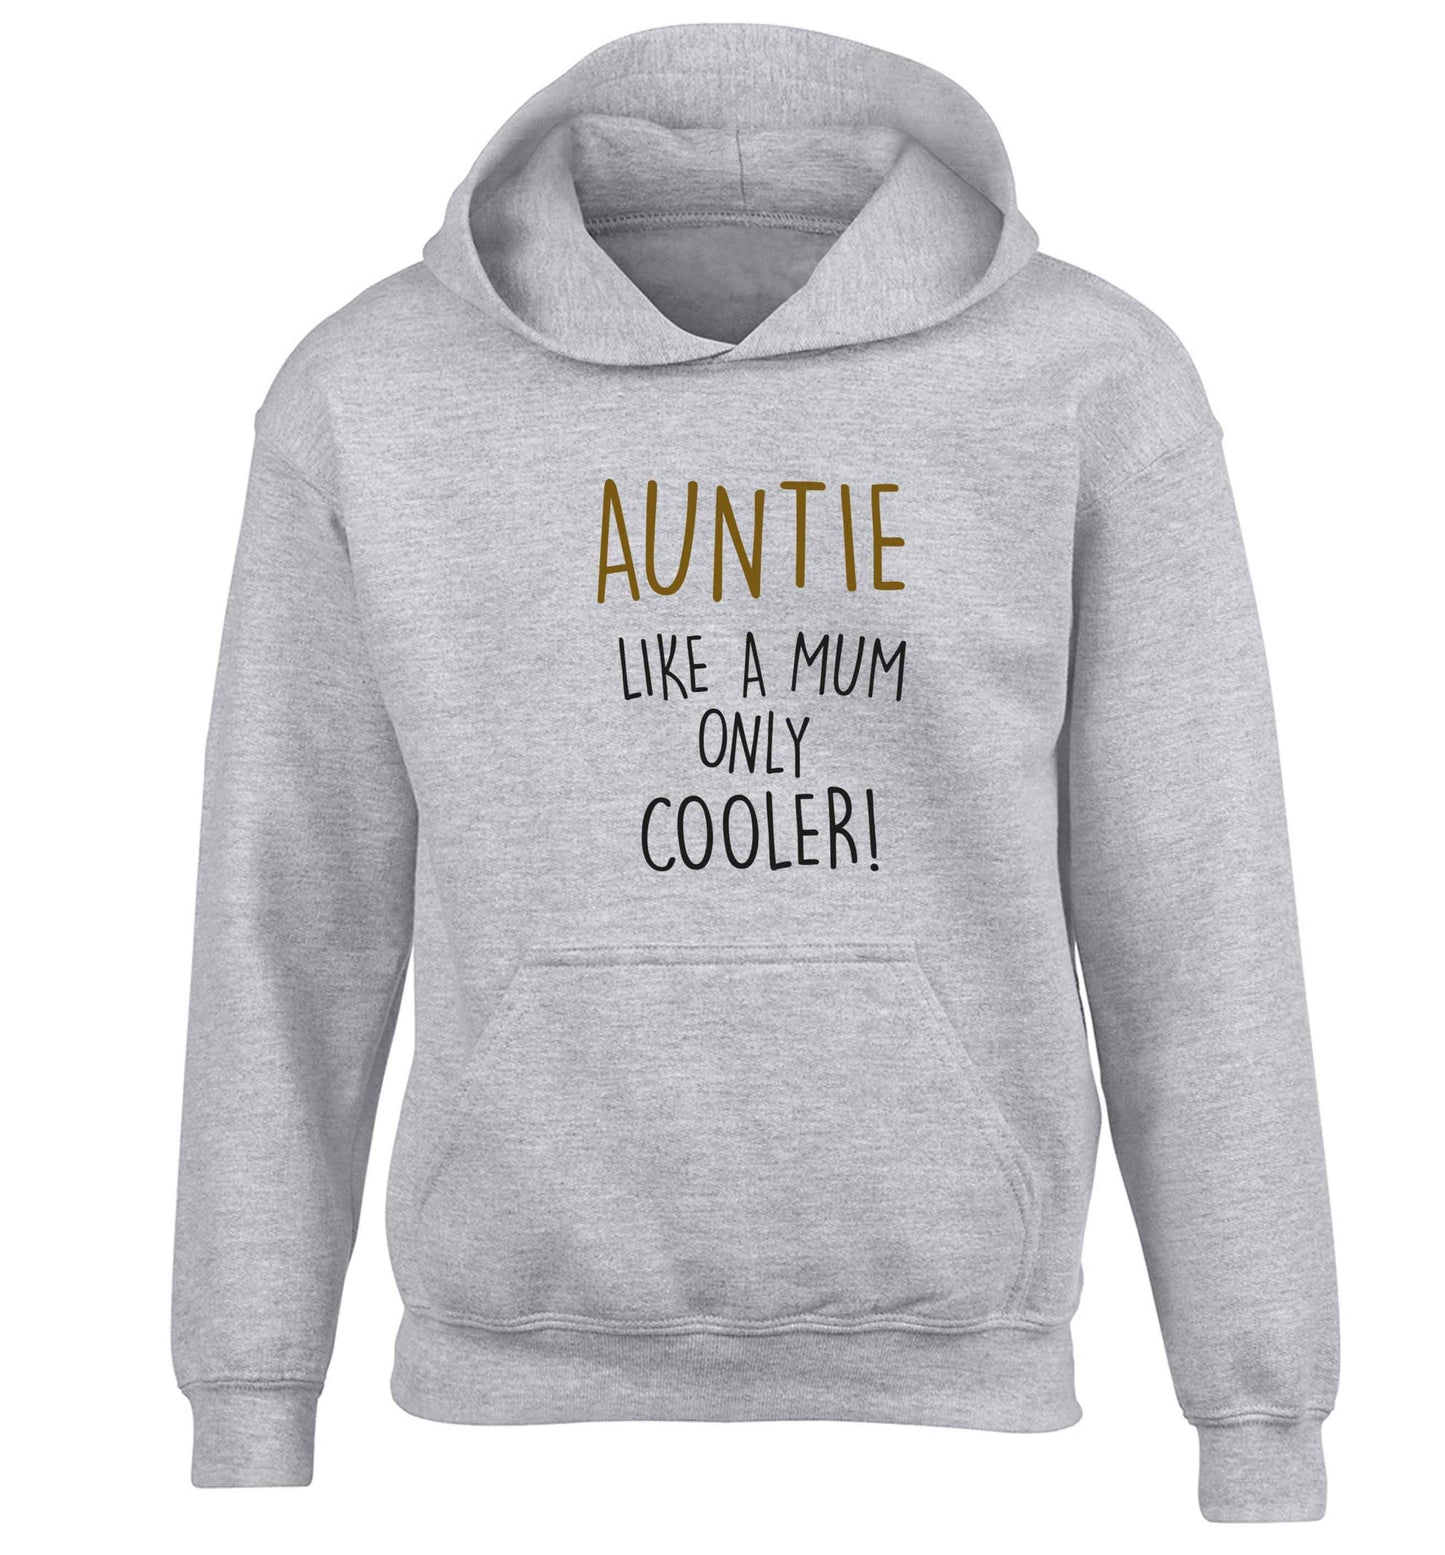 Auntie like a mum only cooler children's grey hoodie 12-13 Years